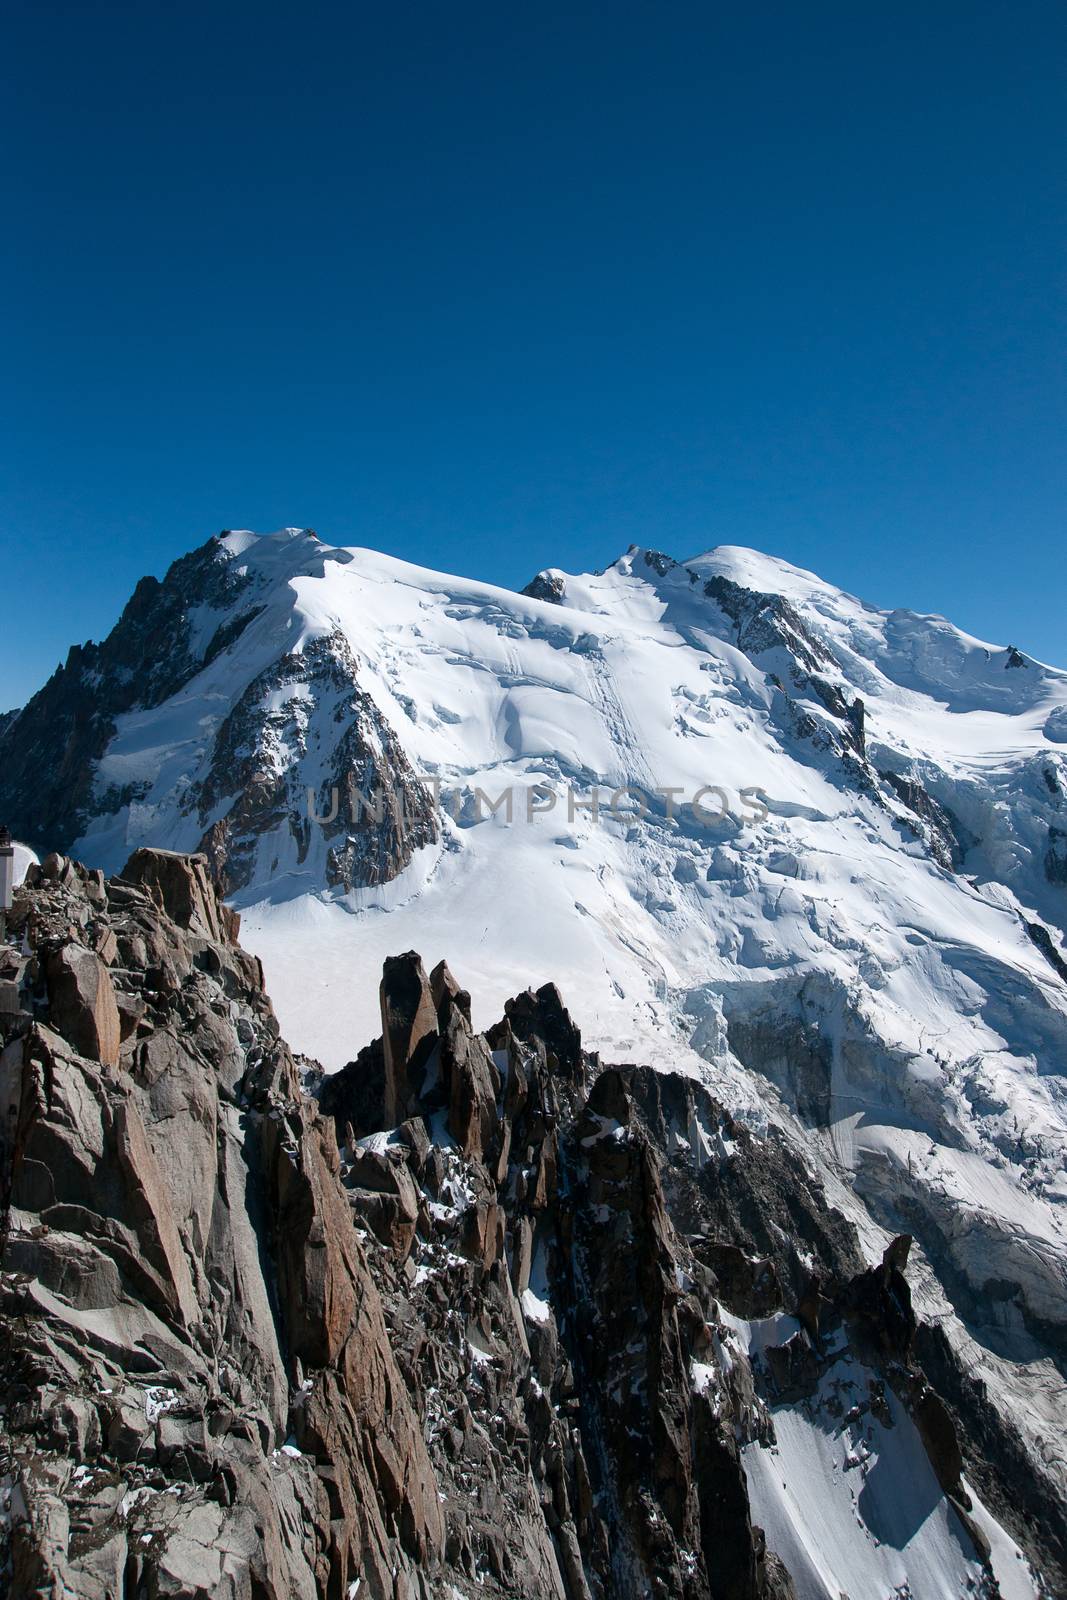 Show landscape in high mountain for tourist attraction in chamonix